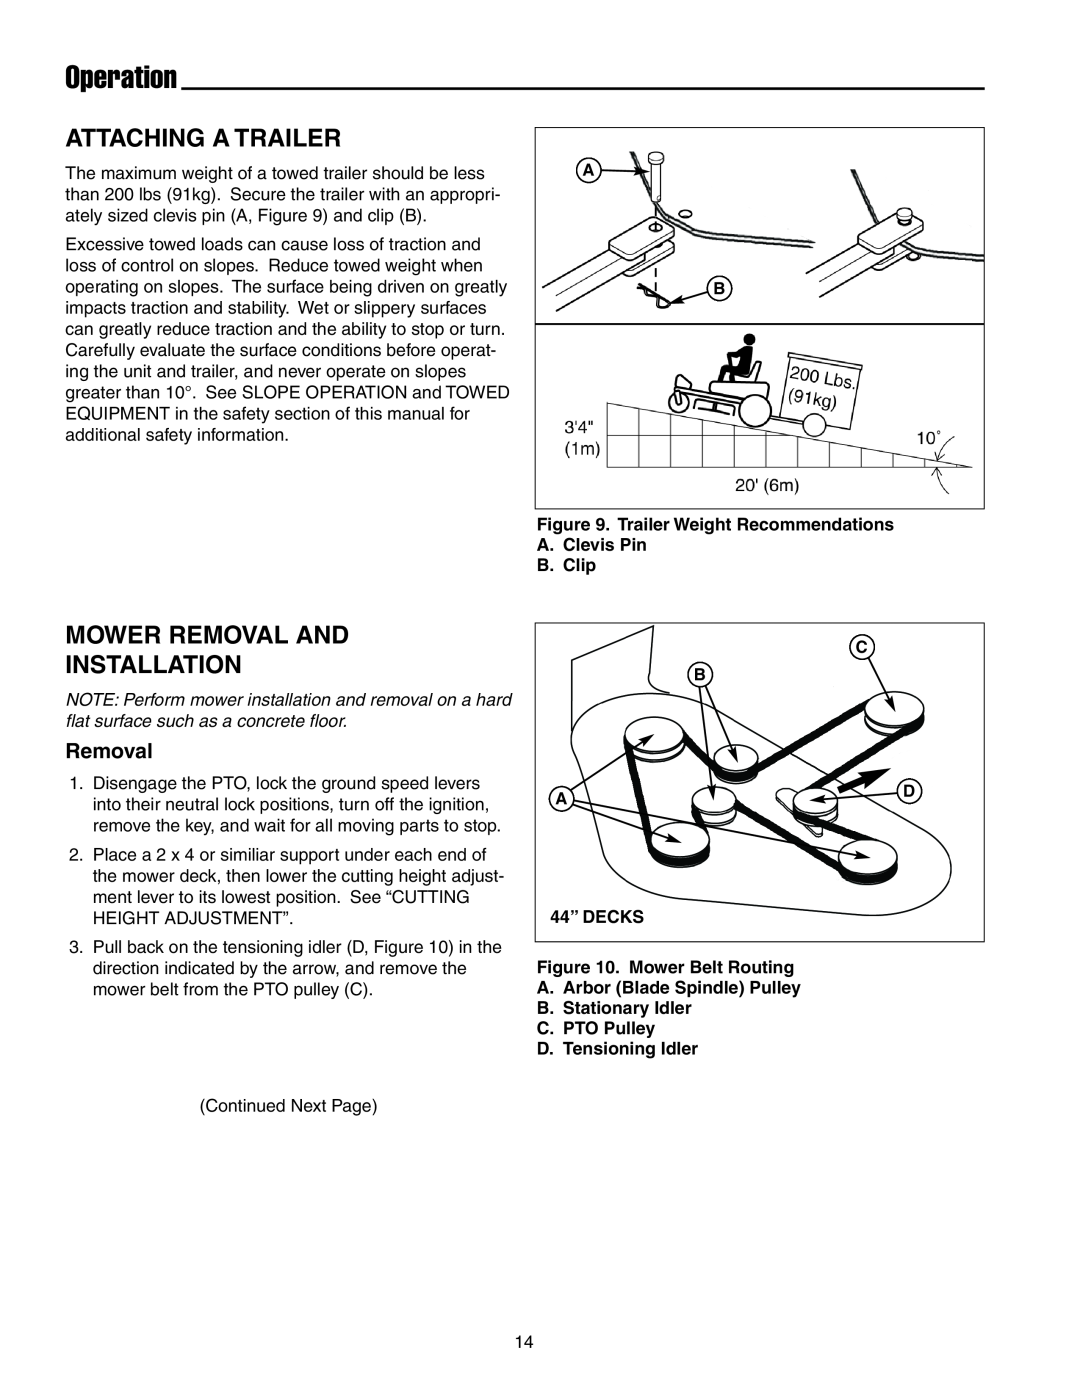 Simplicity 7800071, 7800072 instruction sheet Attaching A Trailer, Mower Removal And Installation, Operation, 44” DECKS 